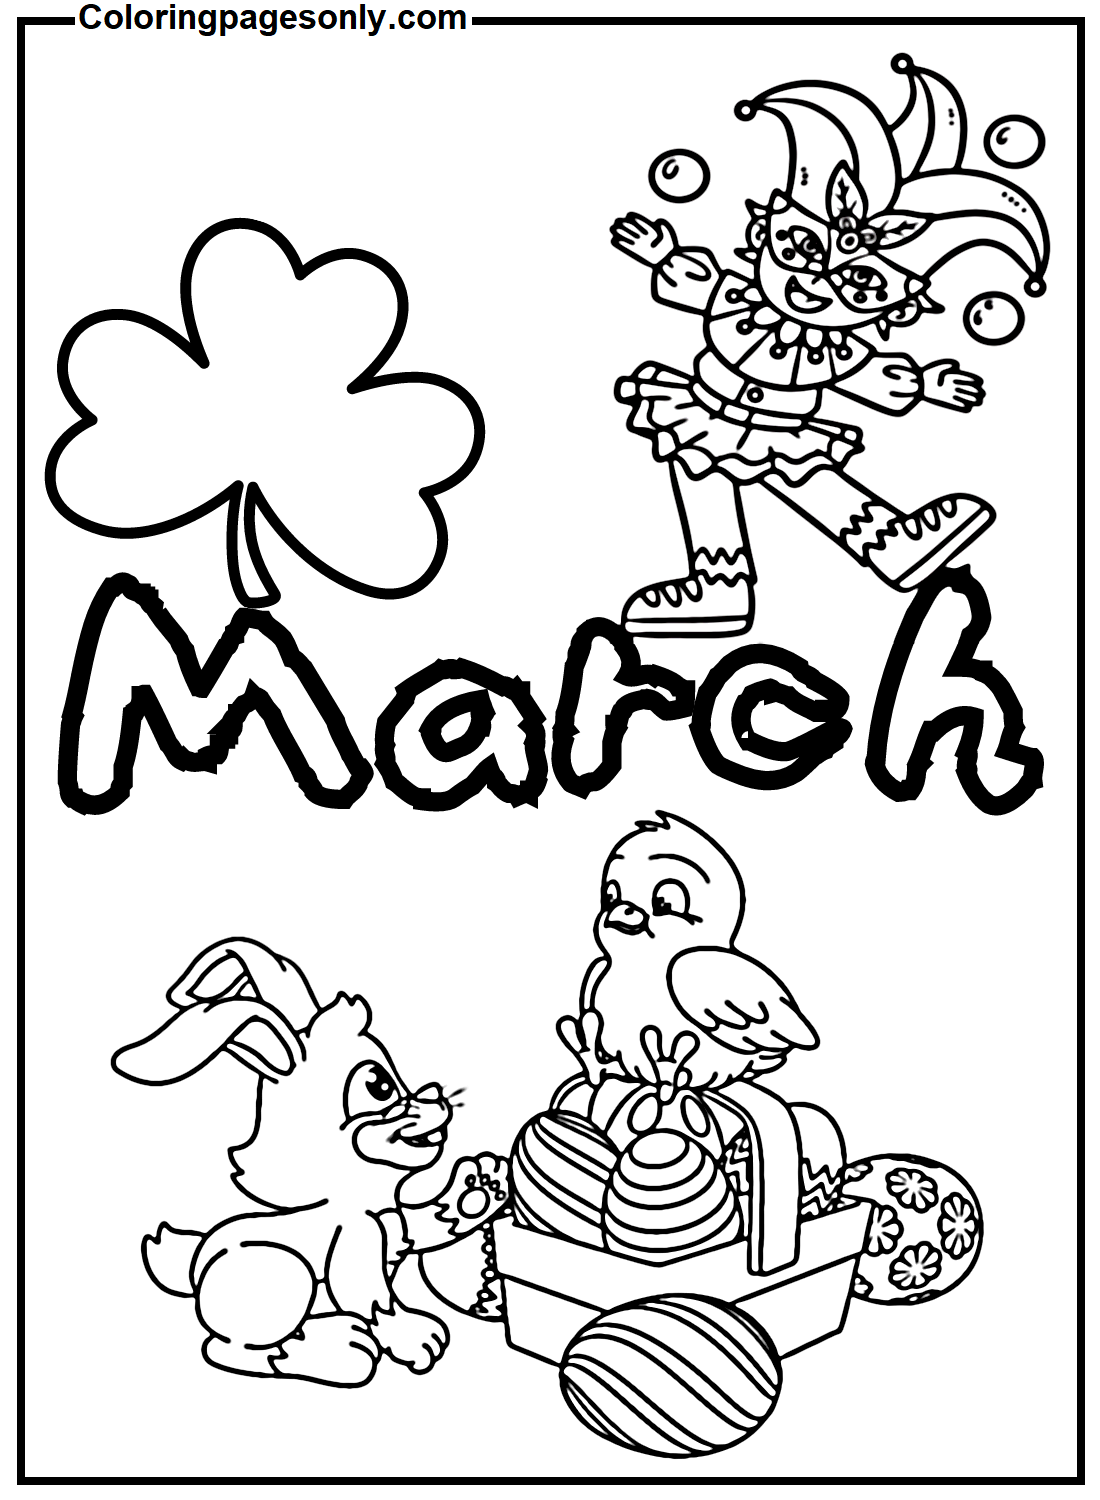 March Coloring Pages Free Printable 17